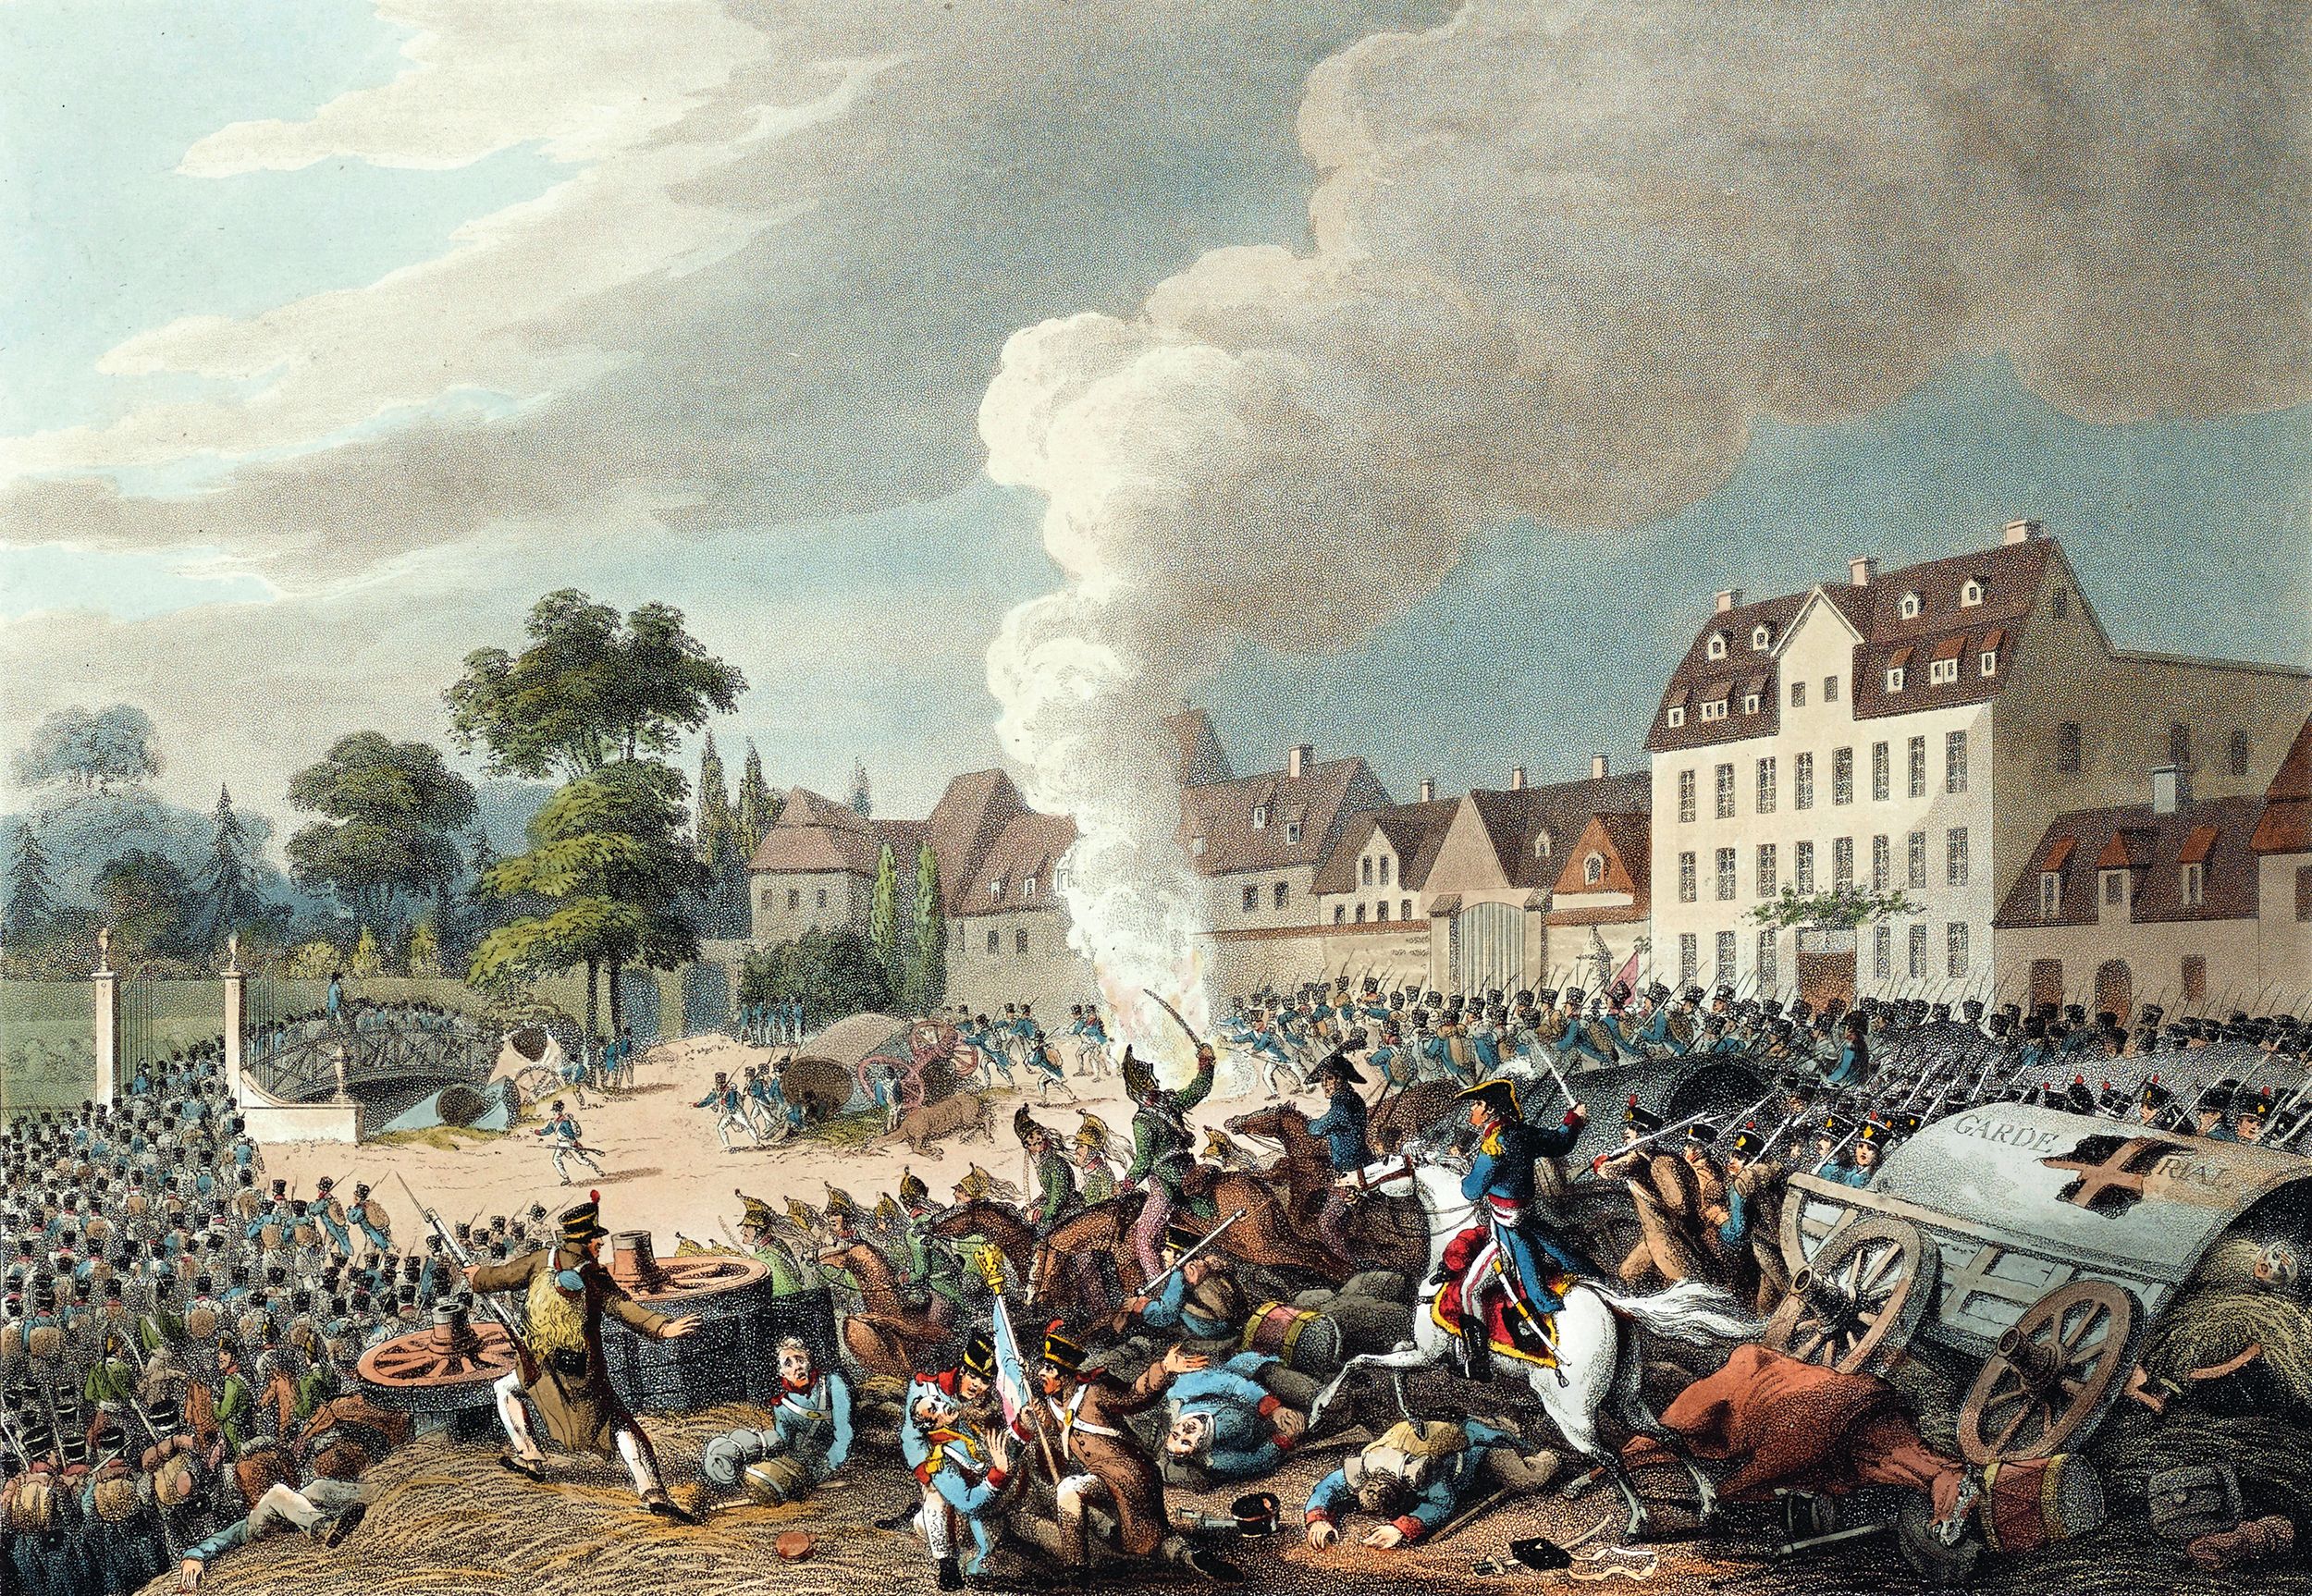 General Jean Reynier’s VII Corps fought a rearguard action to cover the French withdrawal, but the premature detonation of explosives on a bridge left 20,000 French forces trapped with no escape.